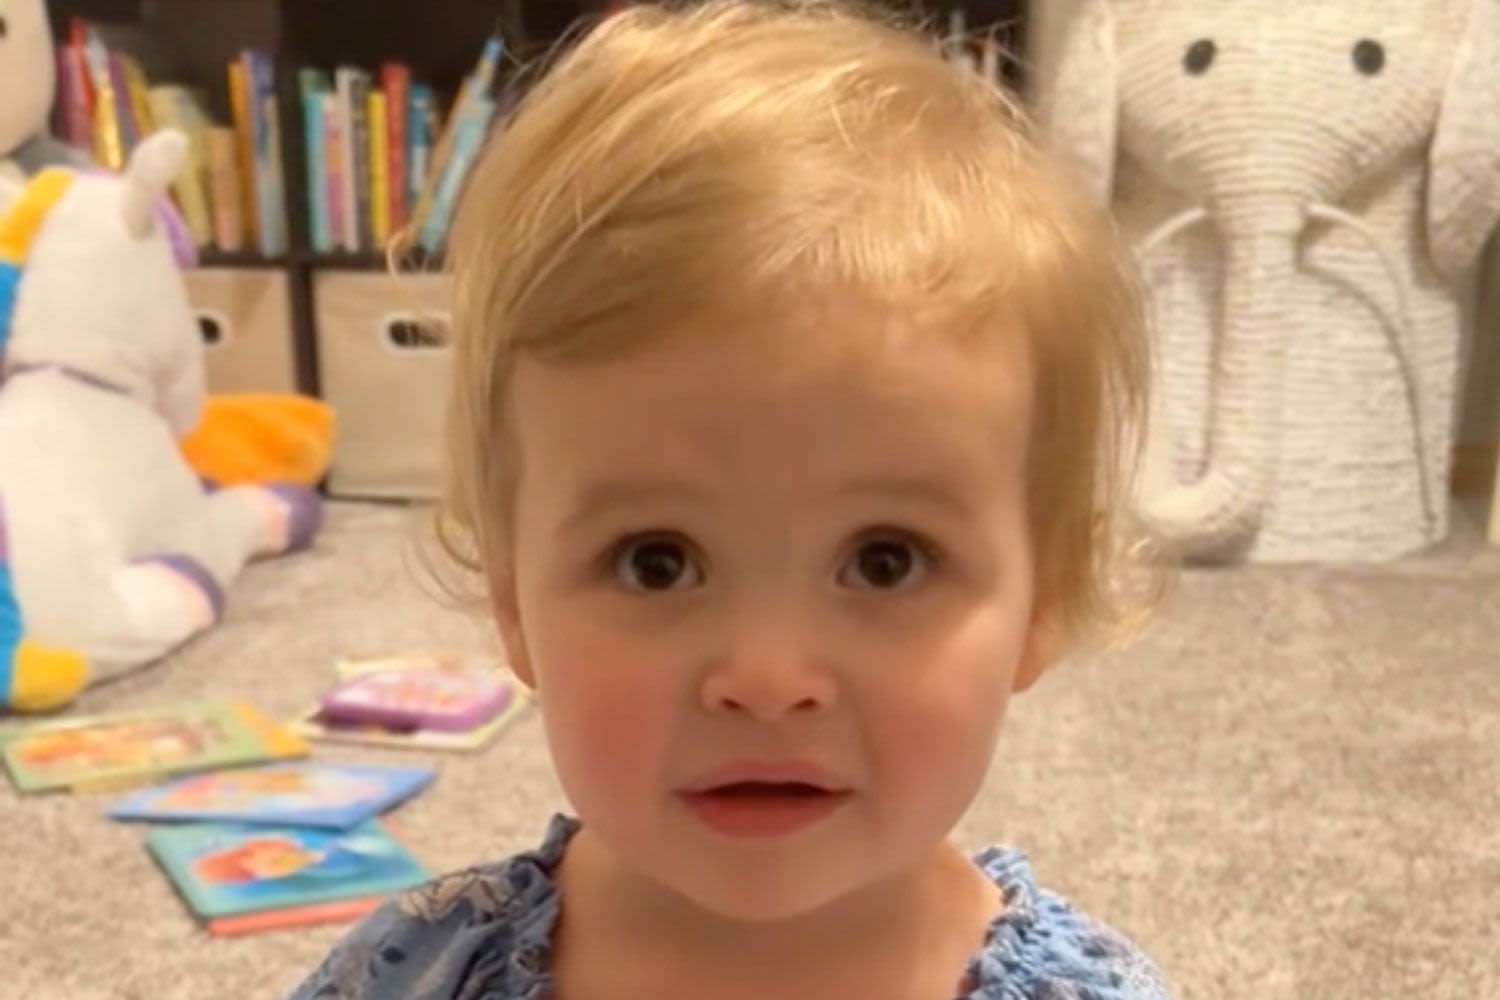 Toddler, 2, Can't Get Over Hole in Mom’s Pants, Asks 'What Happened?' More Than a Dozen Times (Exclusive)